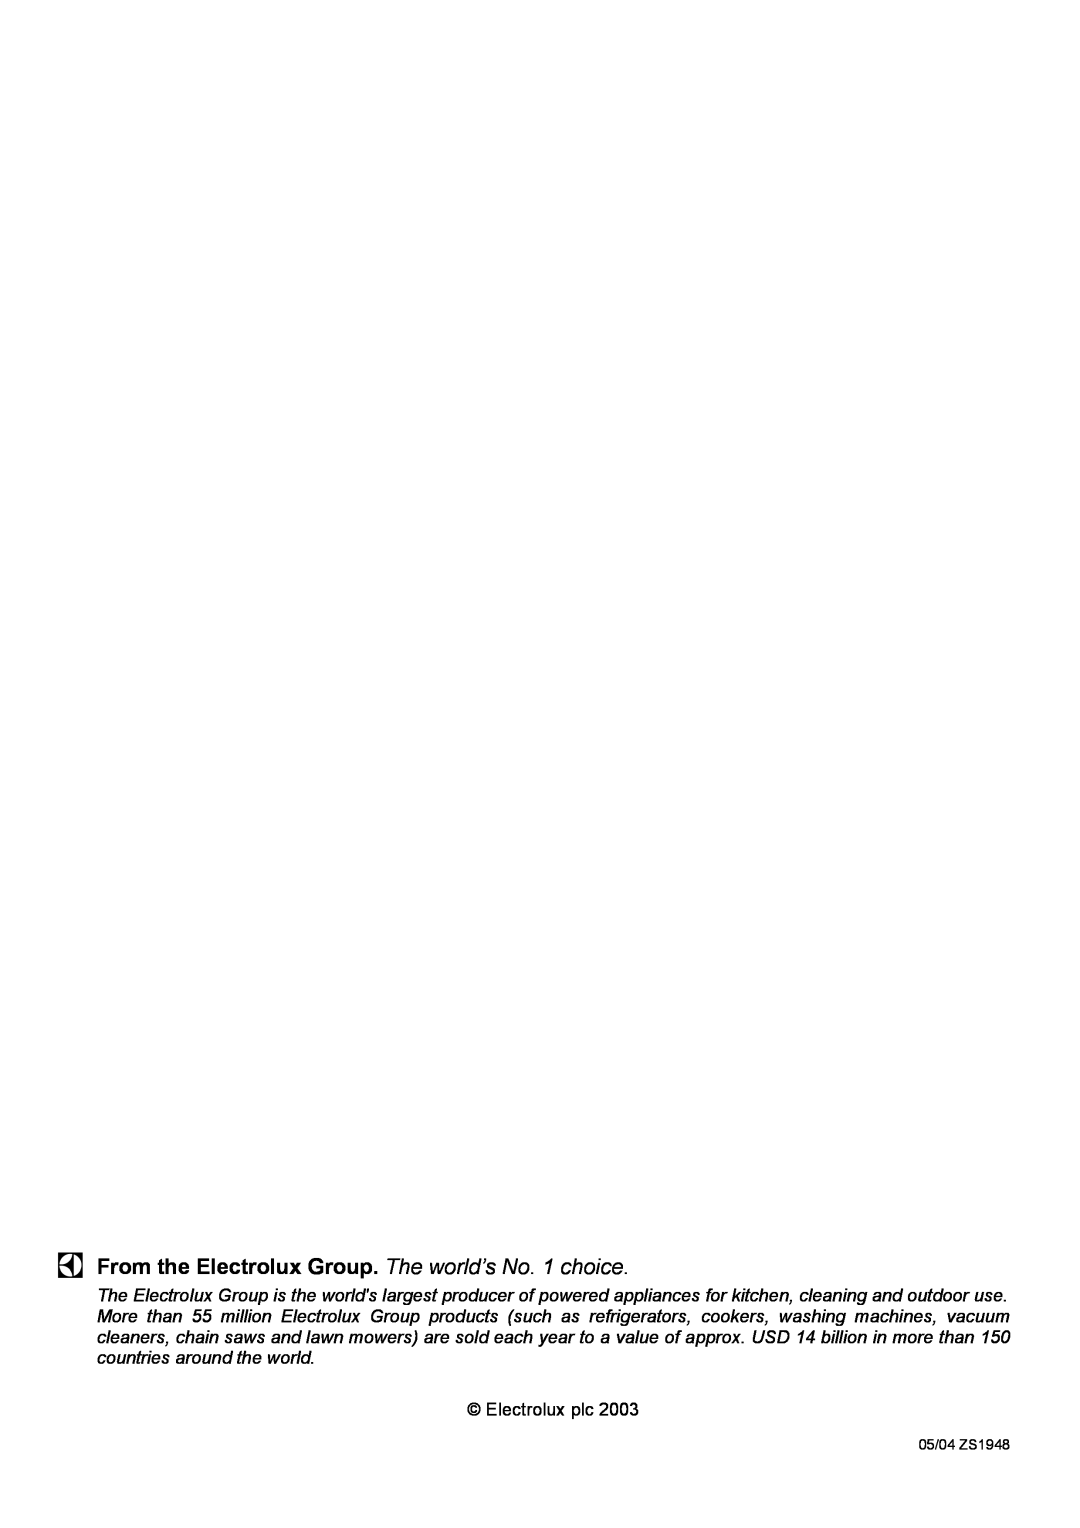 Electrolux C41022V, C41022GN manual From the Electrolux Group. The world’s No. 1 choice, Electrolux plc 